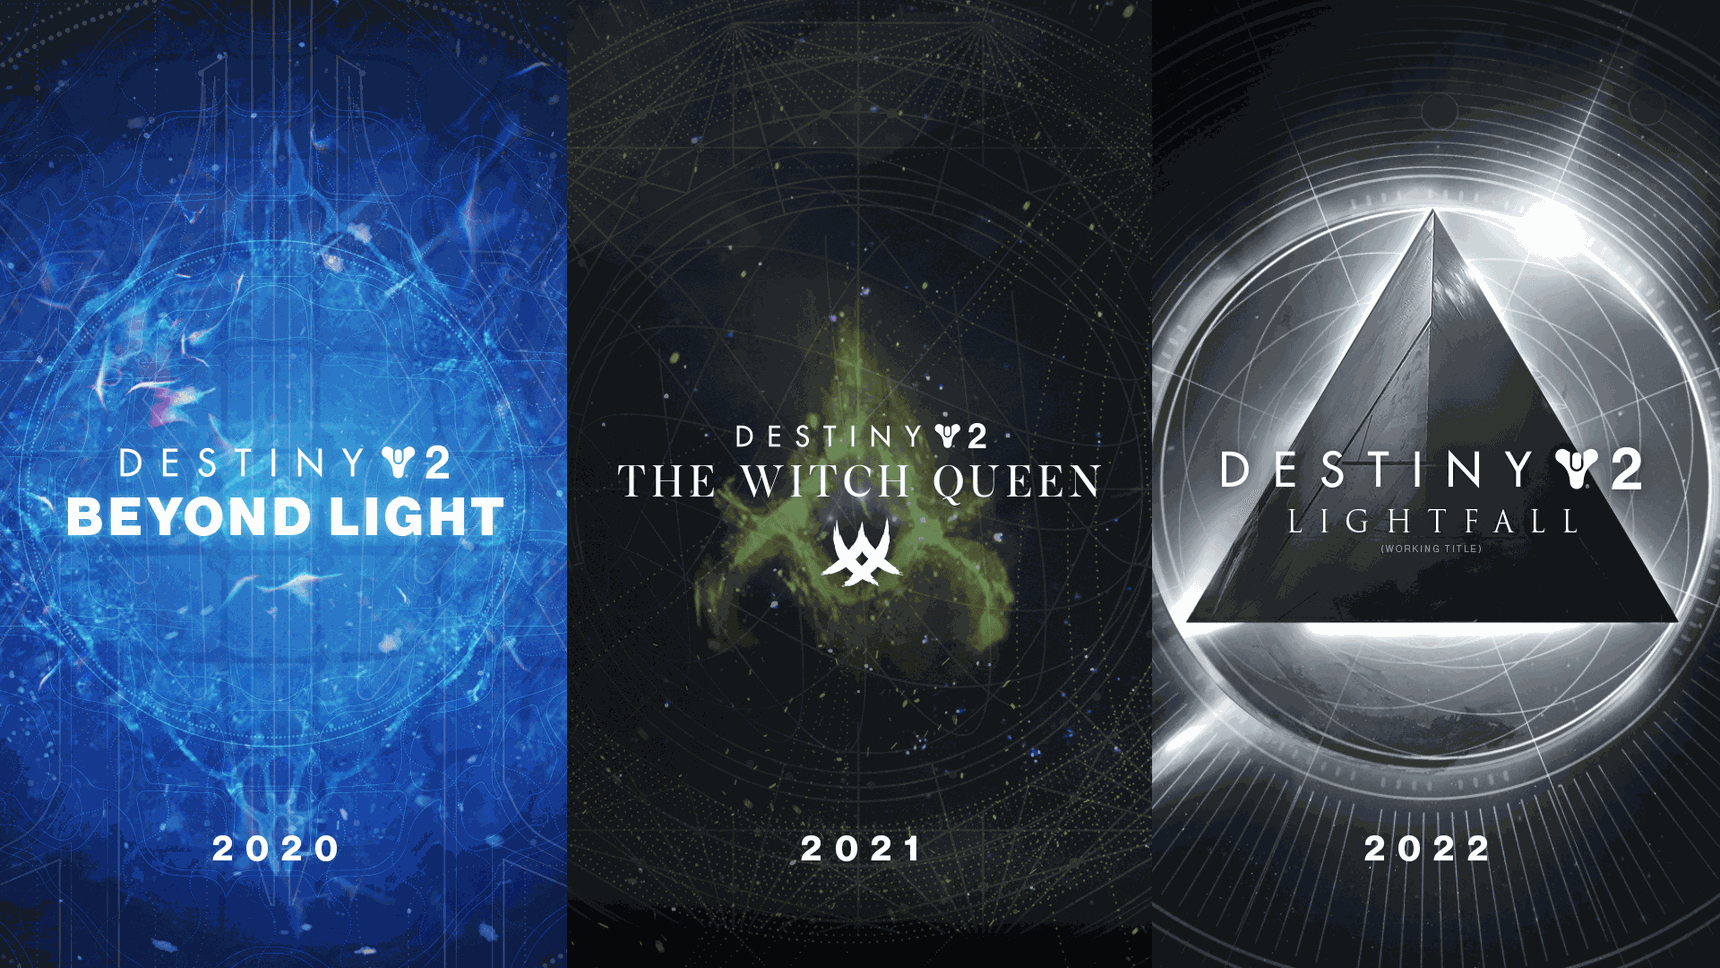 Destiny 2 will be receiving additional content expansions over the next couple of years.